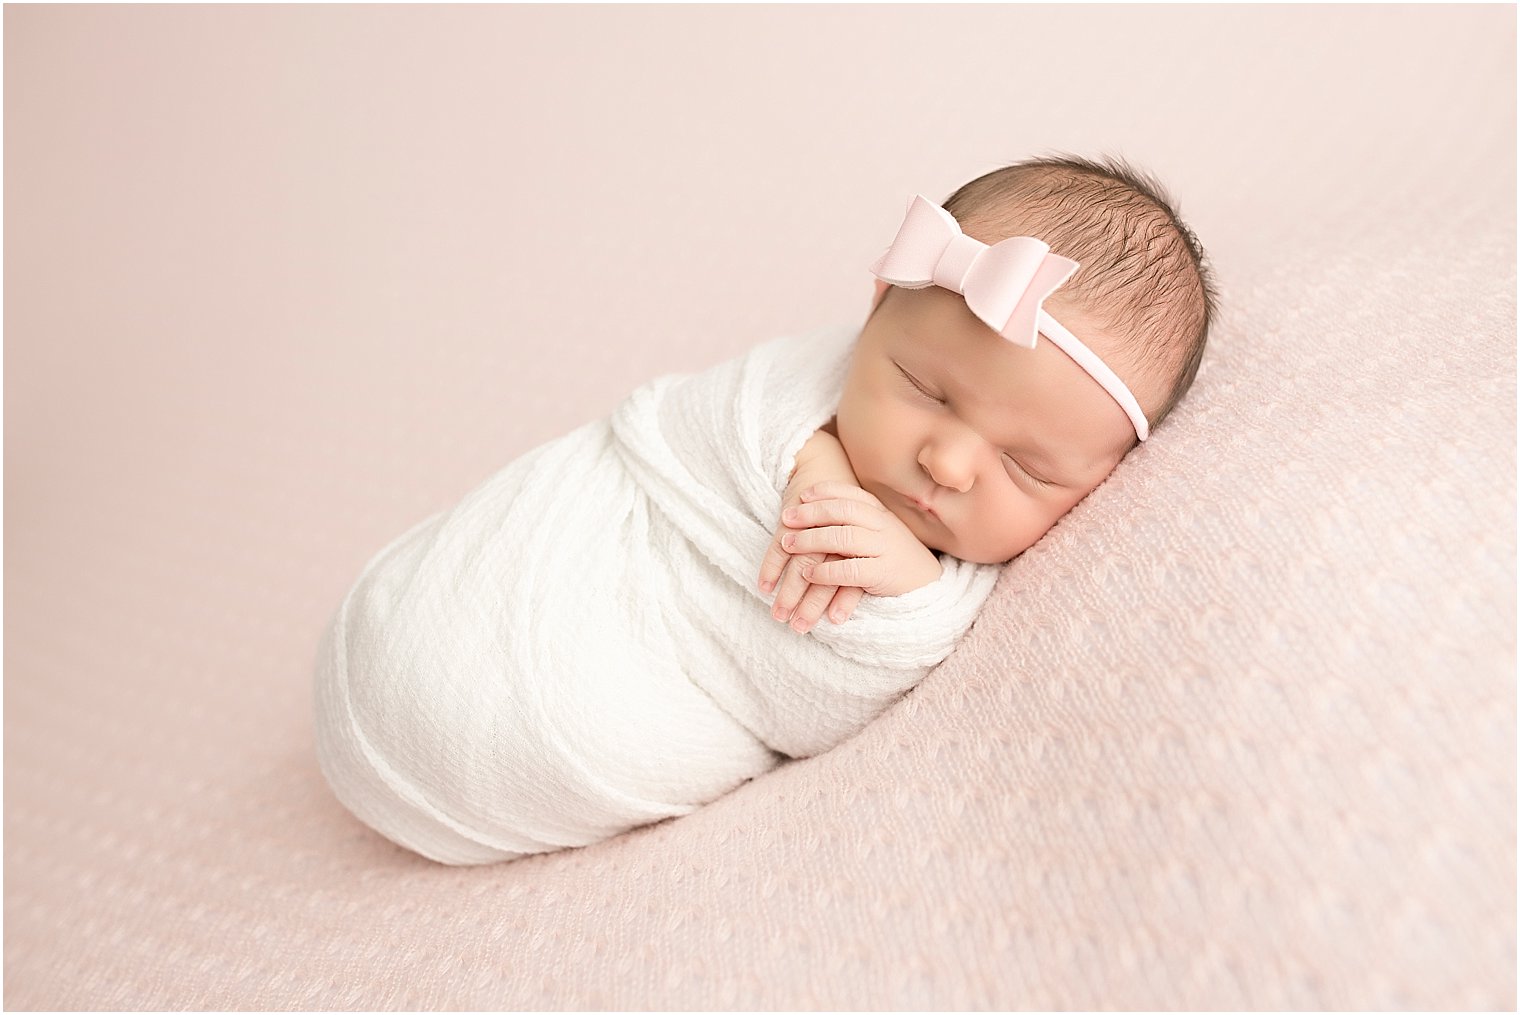 Newborn baby girl in pink and white